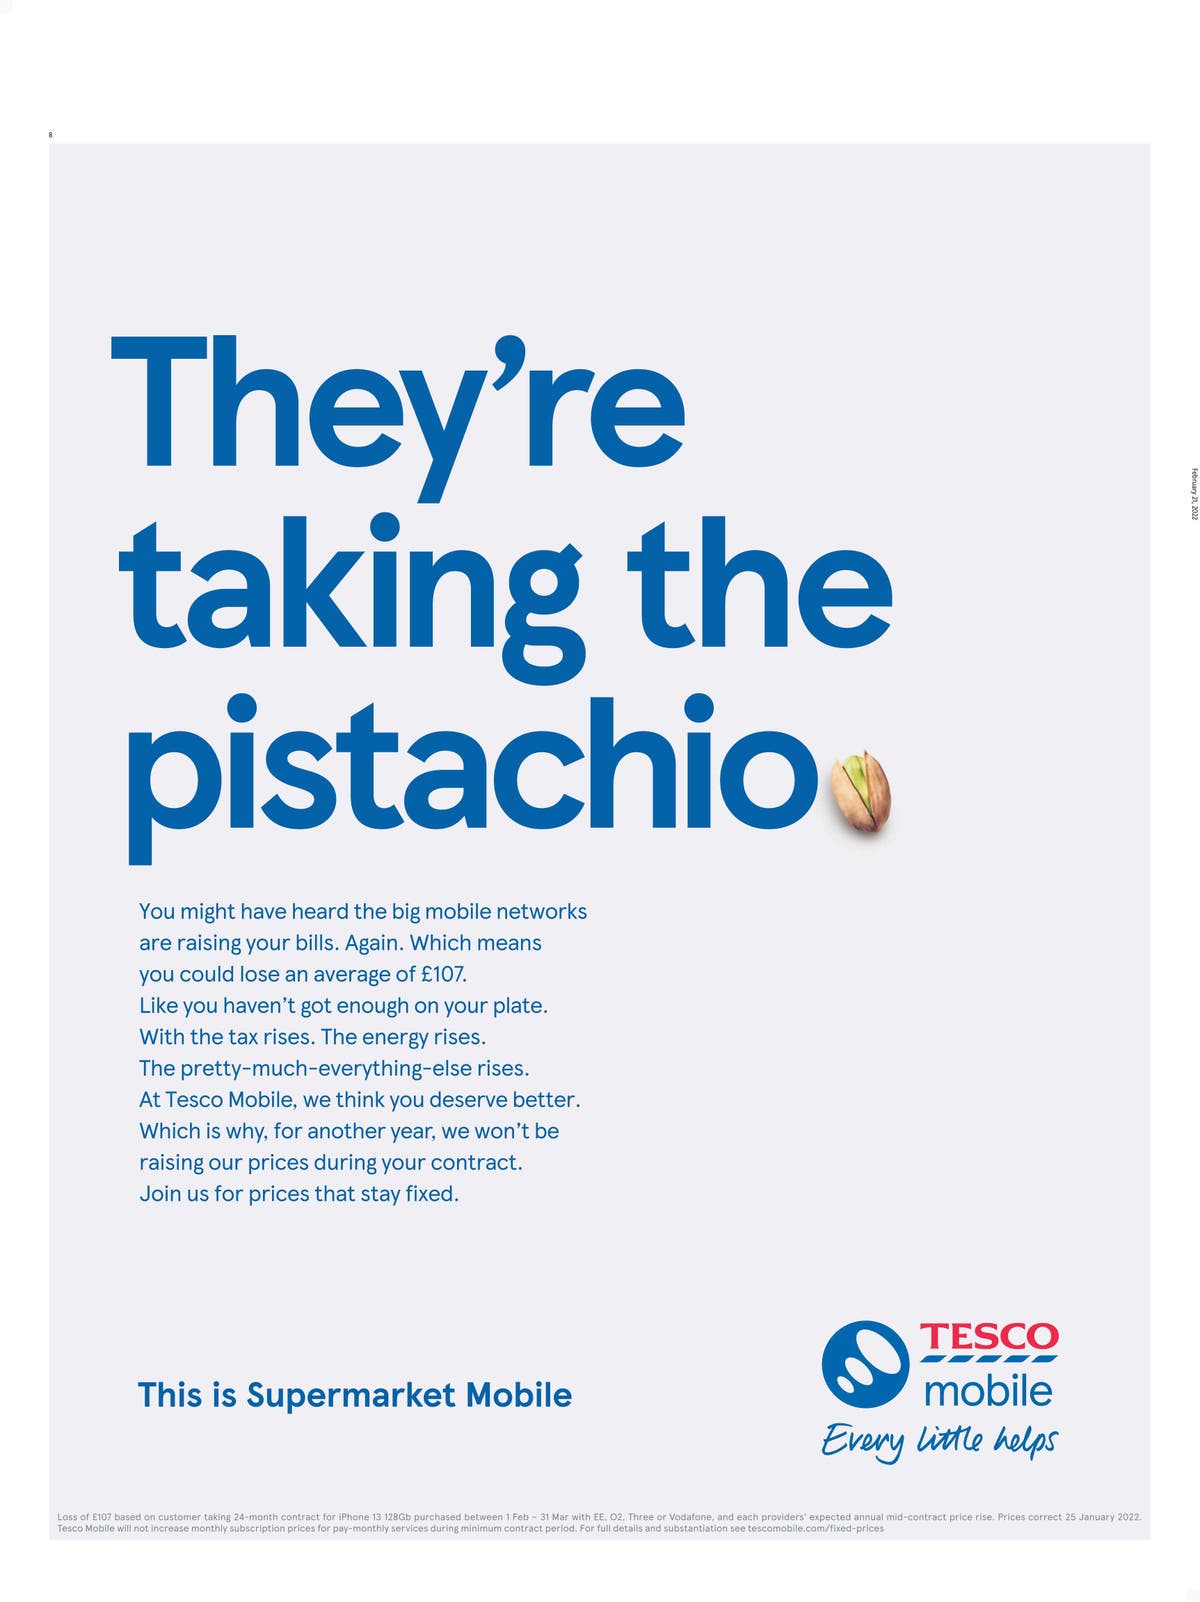 Tesco Mobile ads banned for replacing expletives with food names